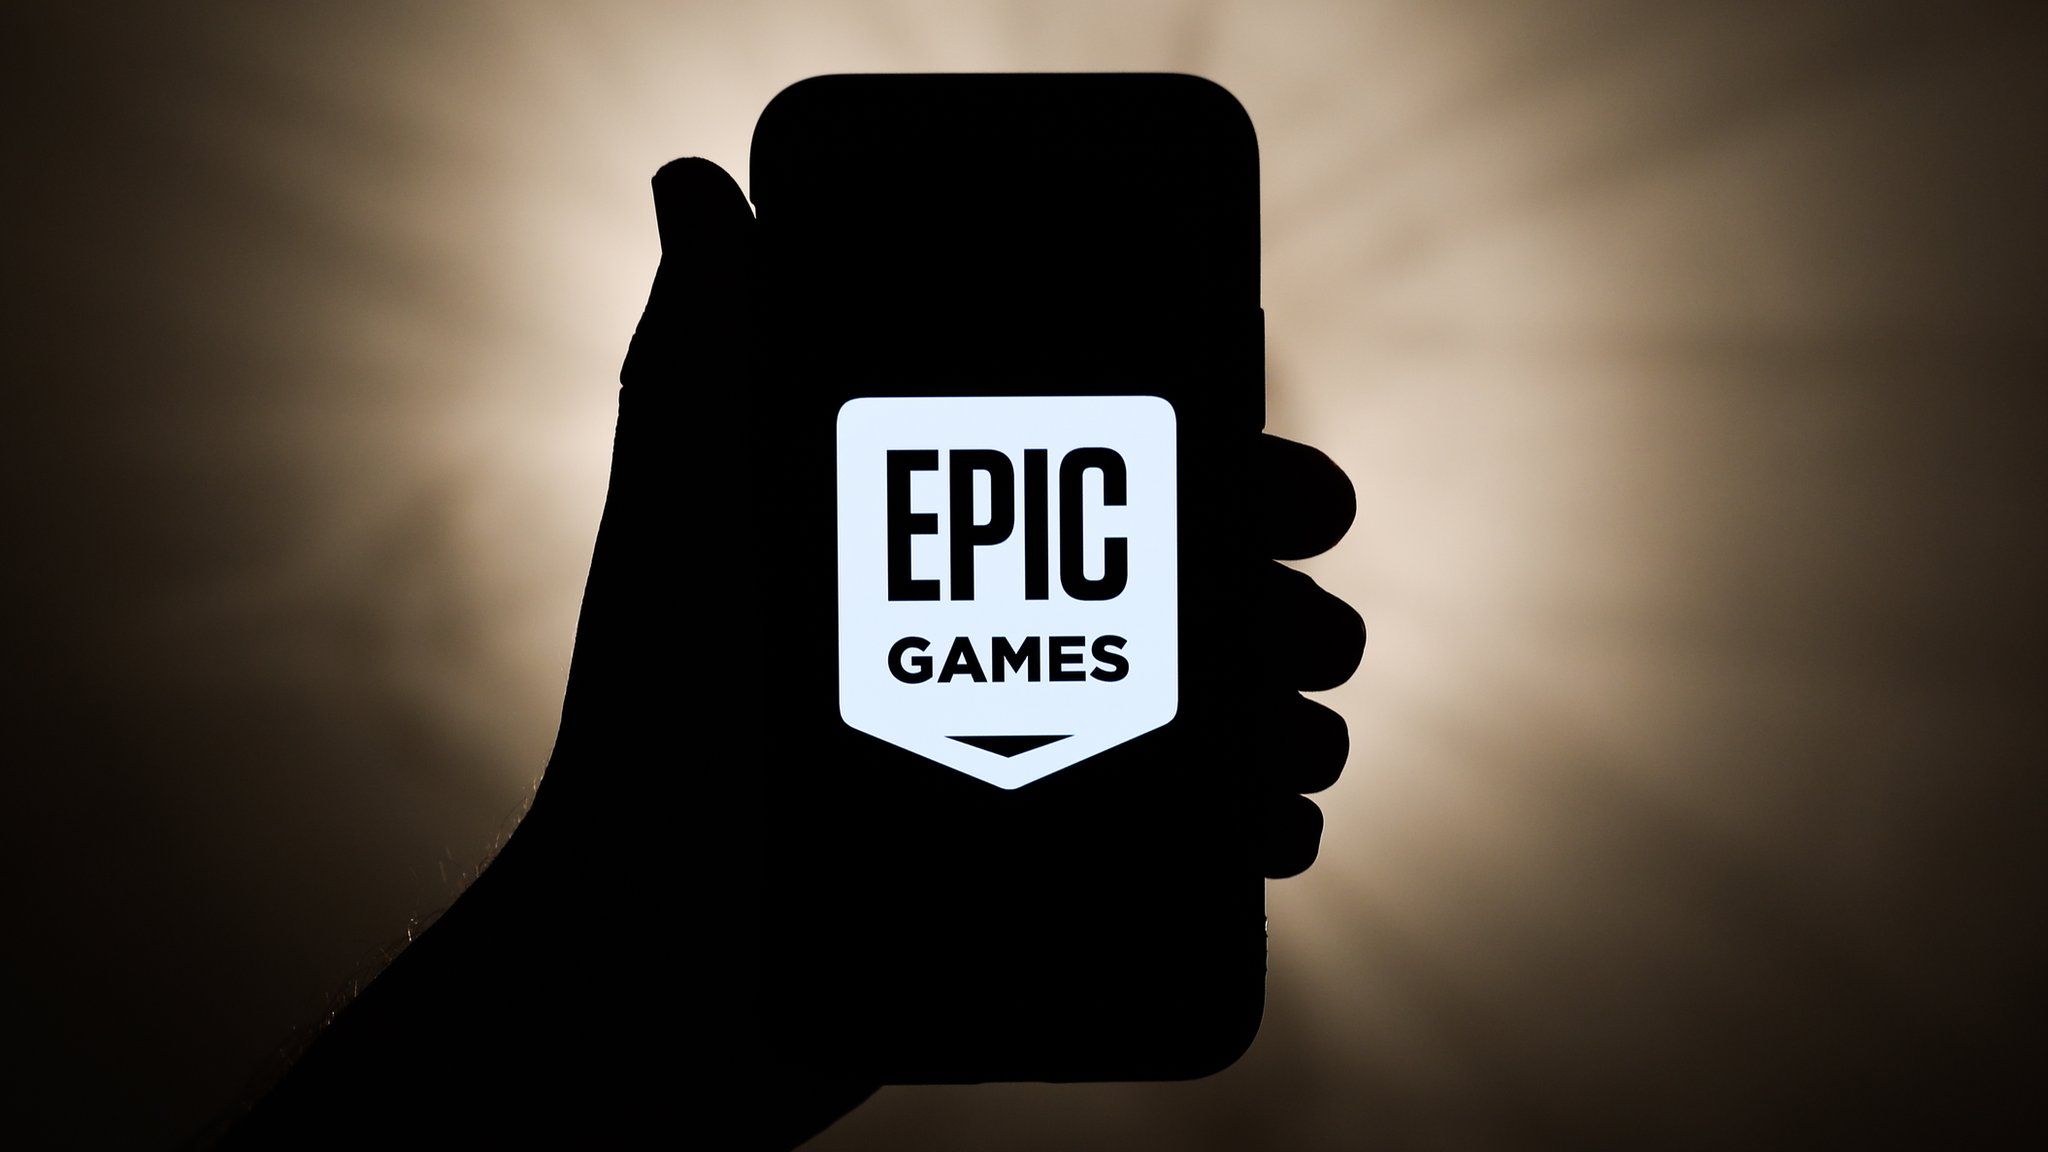 Epic Games logo seen on an iPhone